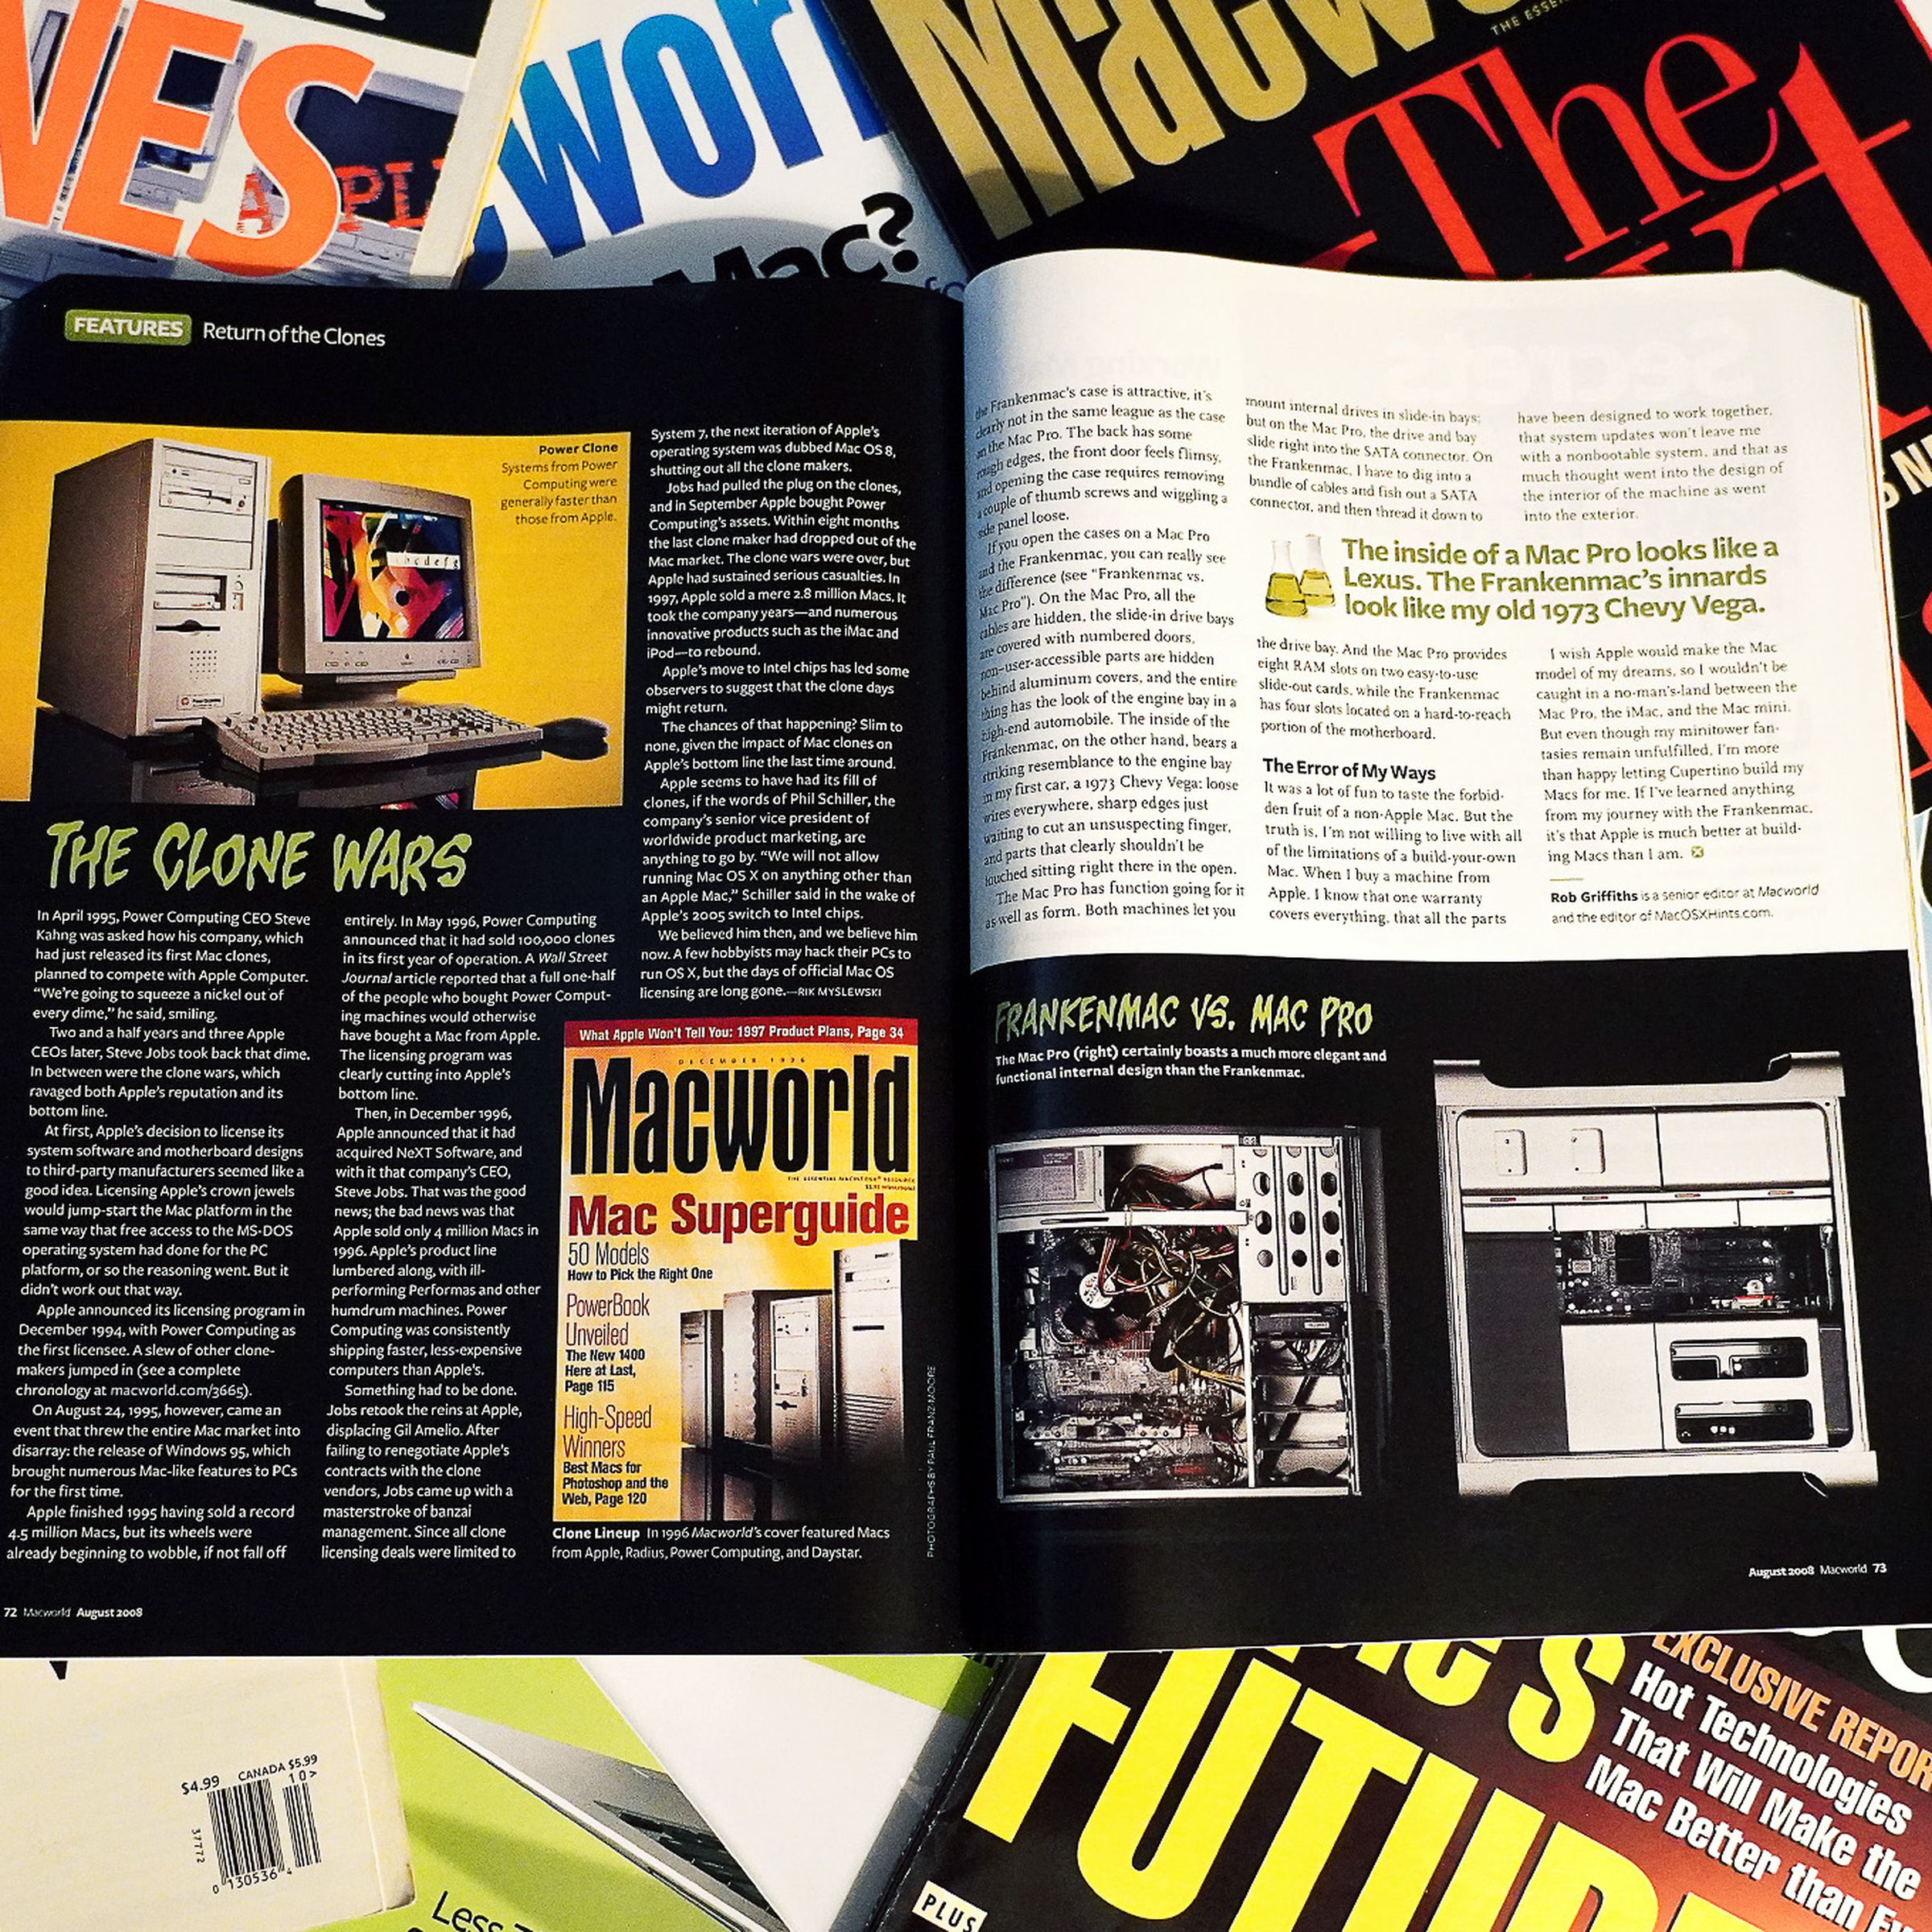 In 2008, Macworld devoted five pages to the kind of midtower Mac that Apple refused to make.